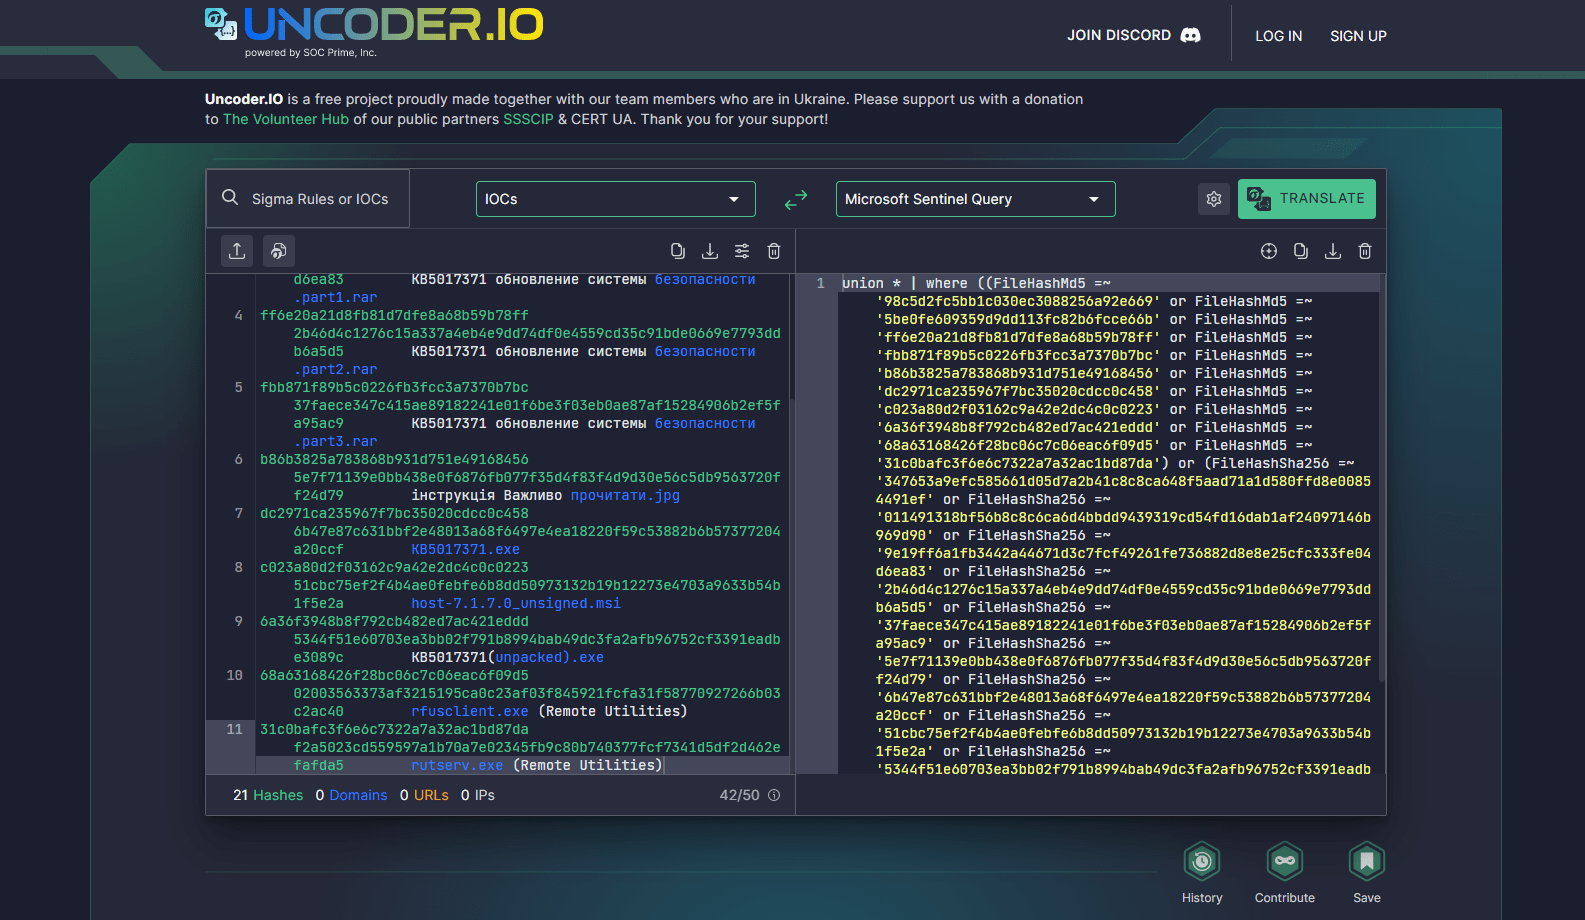 Generation of IOC queries through Uncoder.IO based on the IOCs covered in the CERT-UA#5961 alert